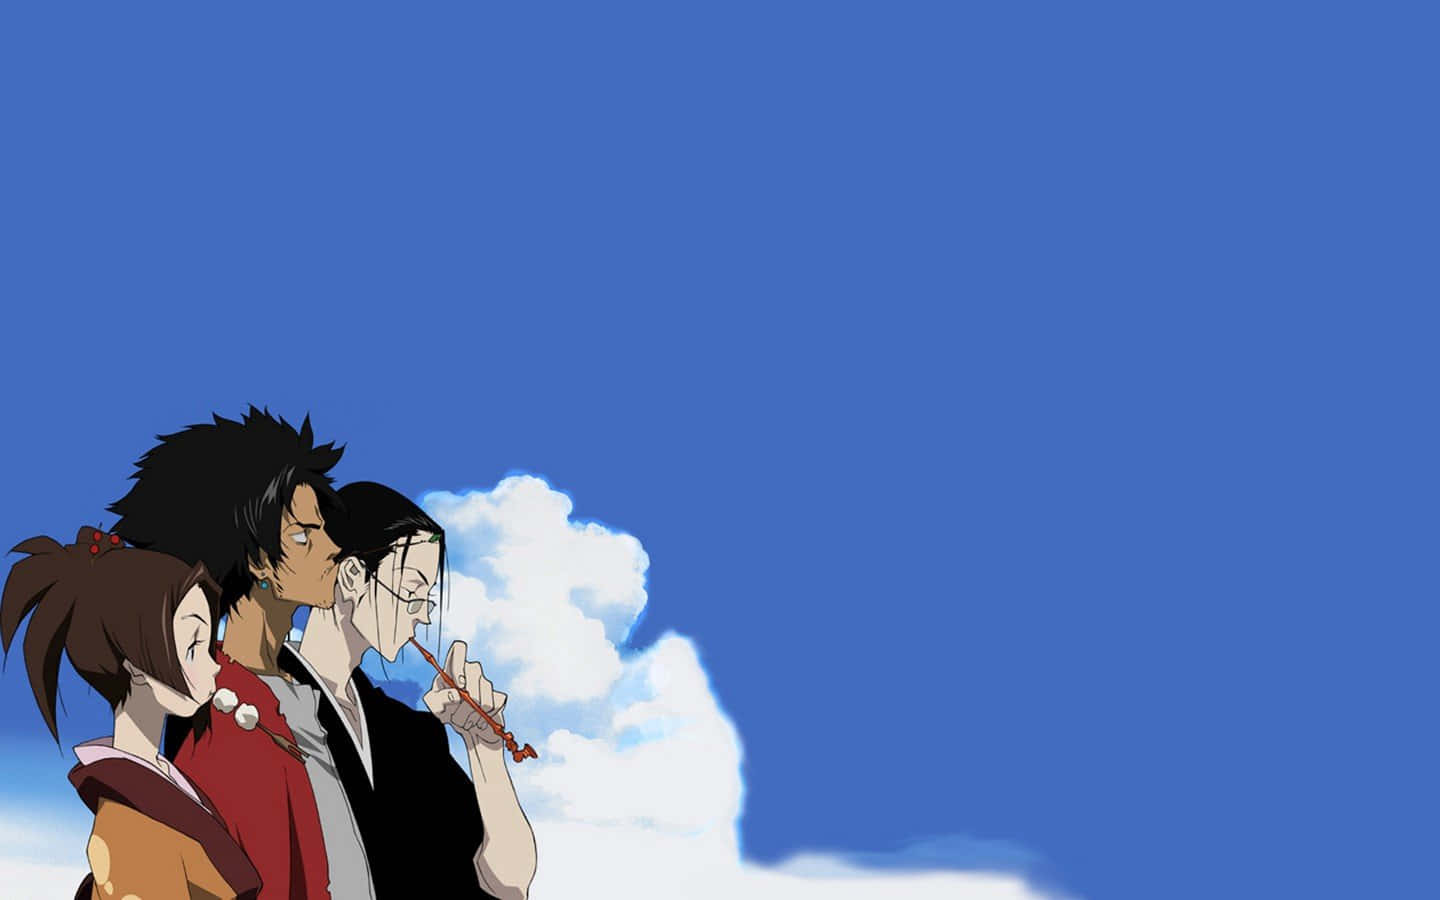 Mugen and Jin, the two main protagonists of Samurai Champloo